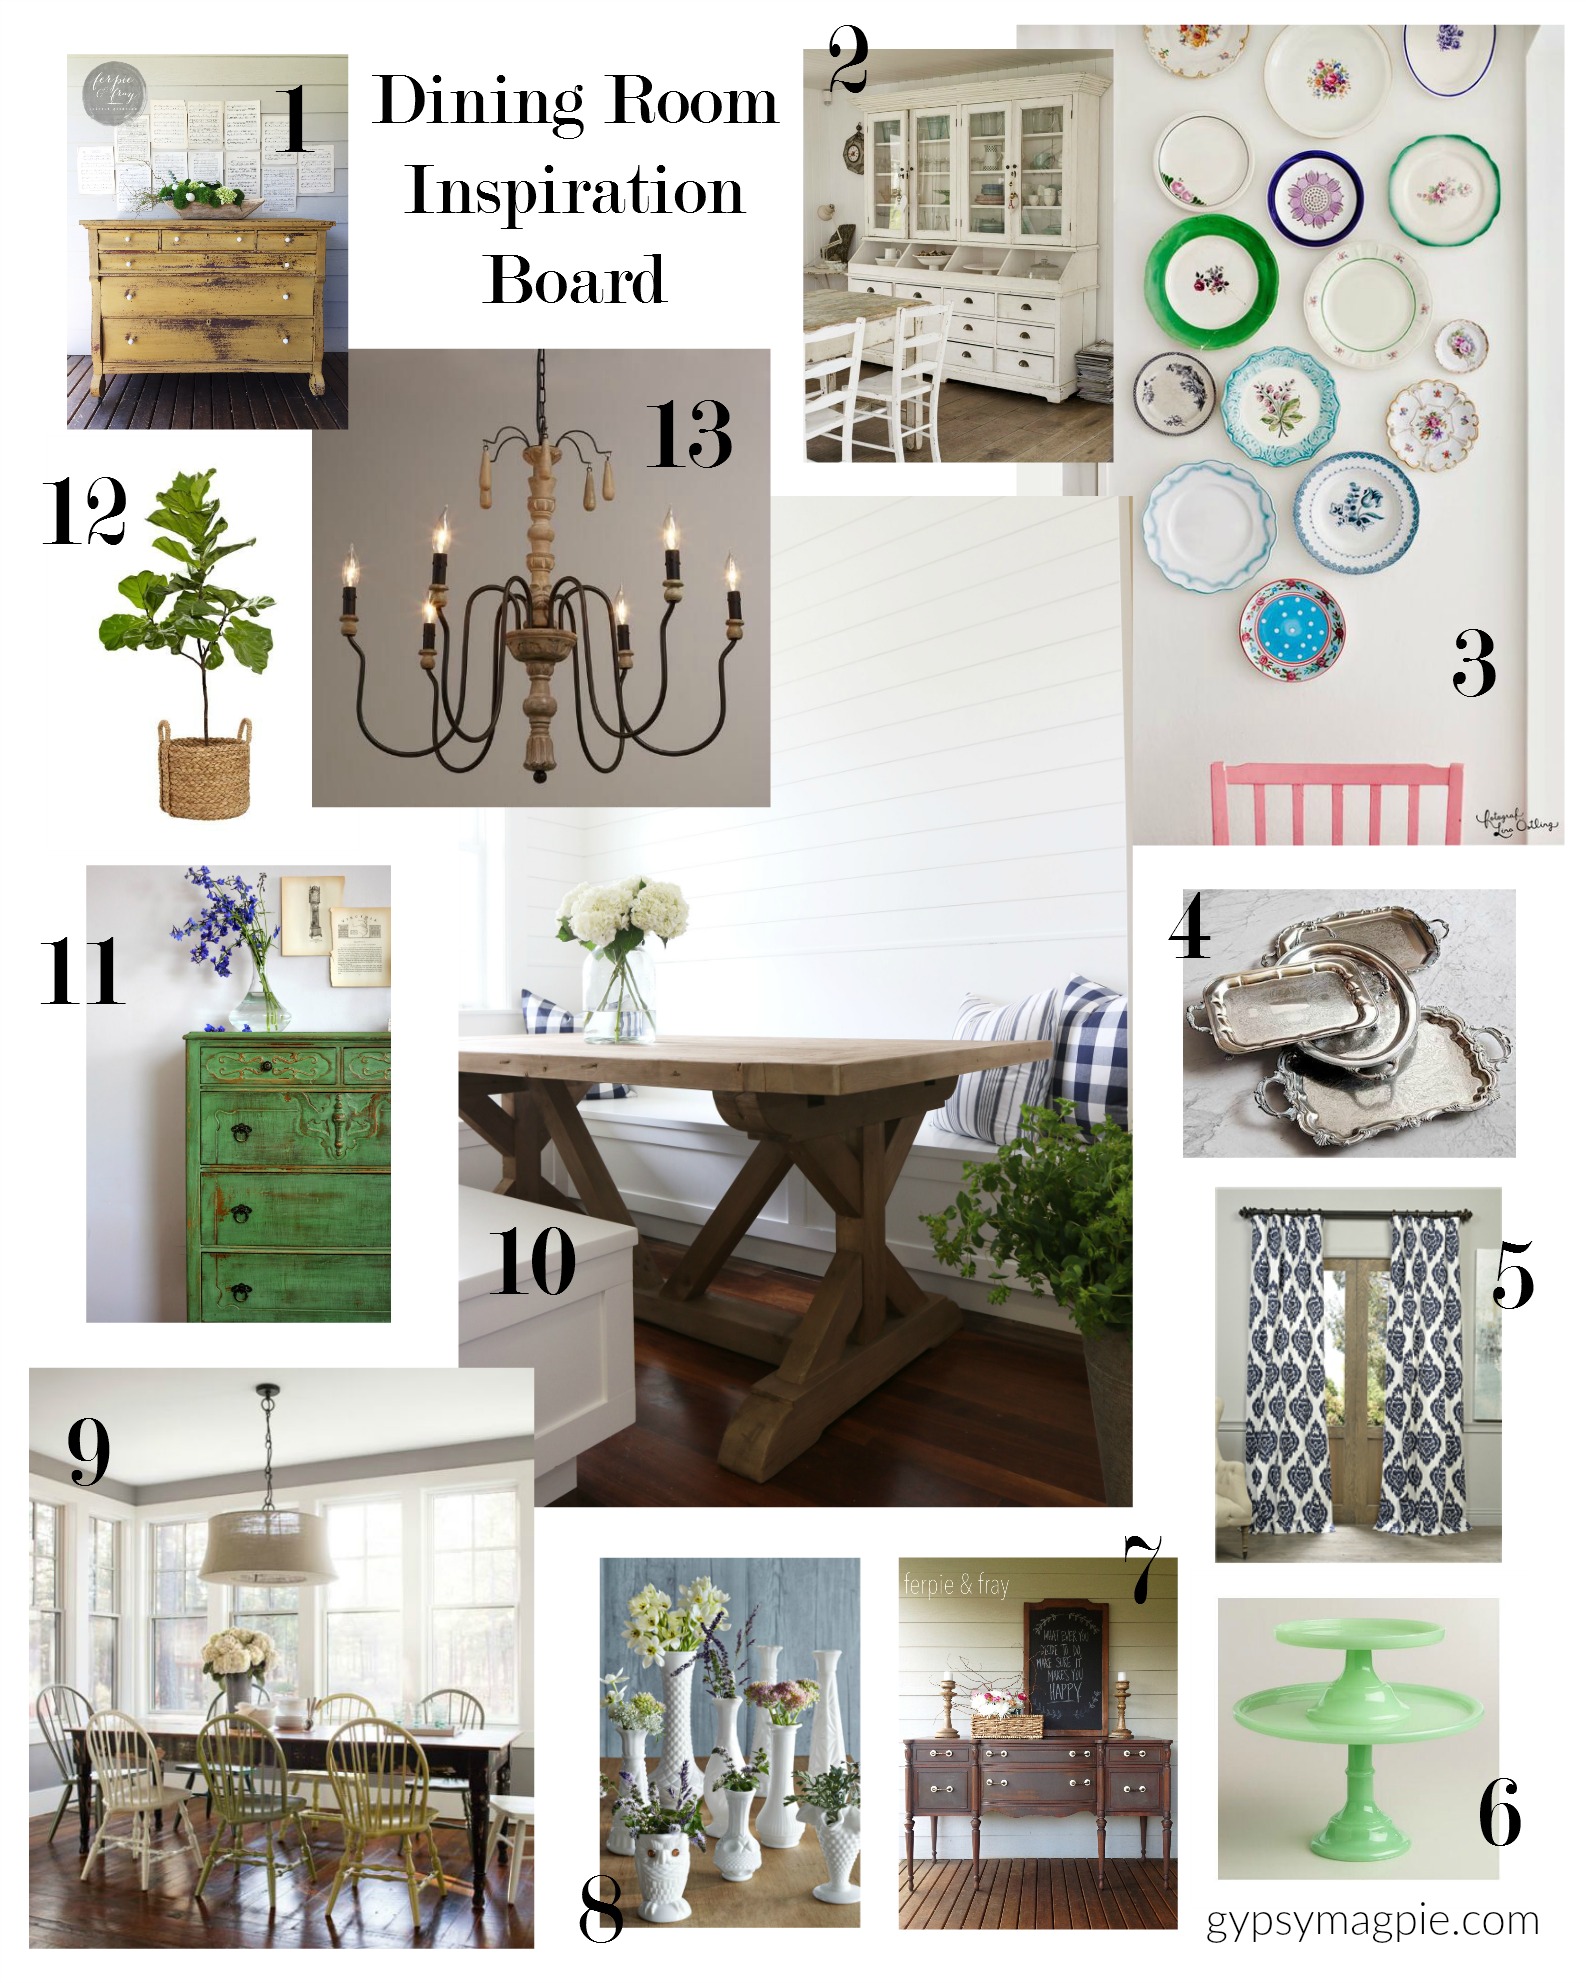 I needed a way to gather my inspiration for my dining room project together in one place, so I created this little inspiration board to keep me focused! I love inpiration boards! | Gypsy Magpie